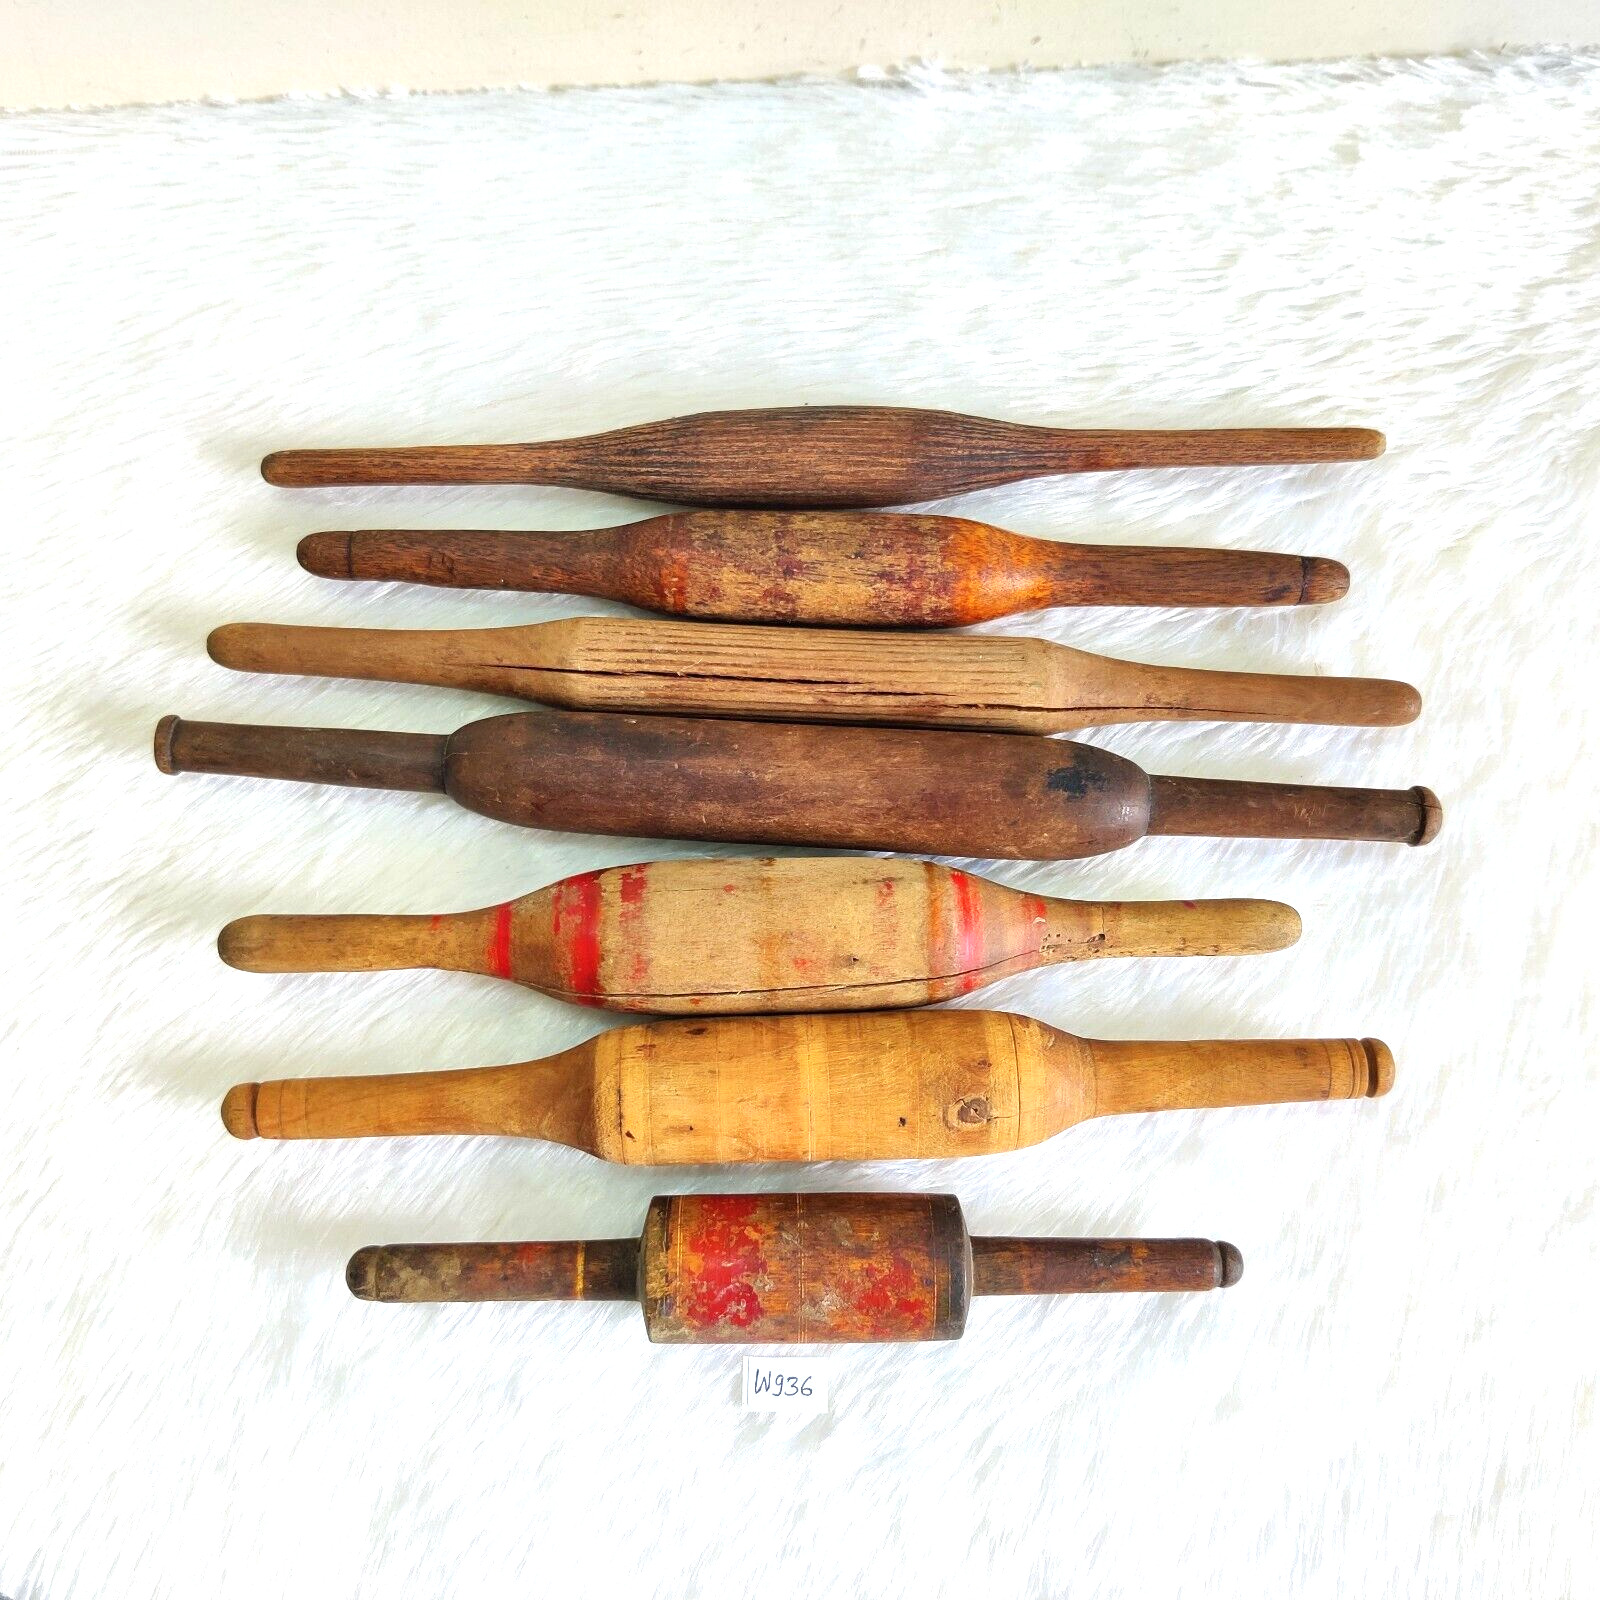 Antique Handmade Tortilla Bread Bakers Wooden Rolling Pin Kitchenware 7Pcs W936